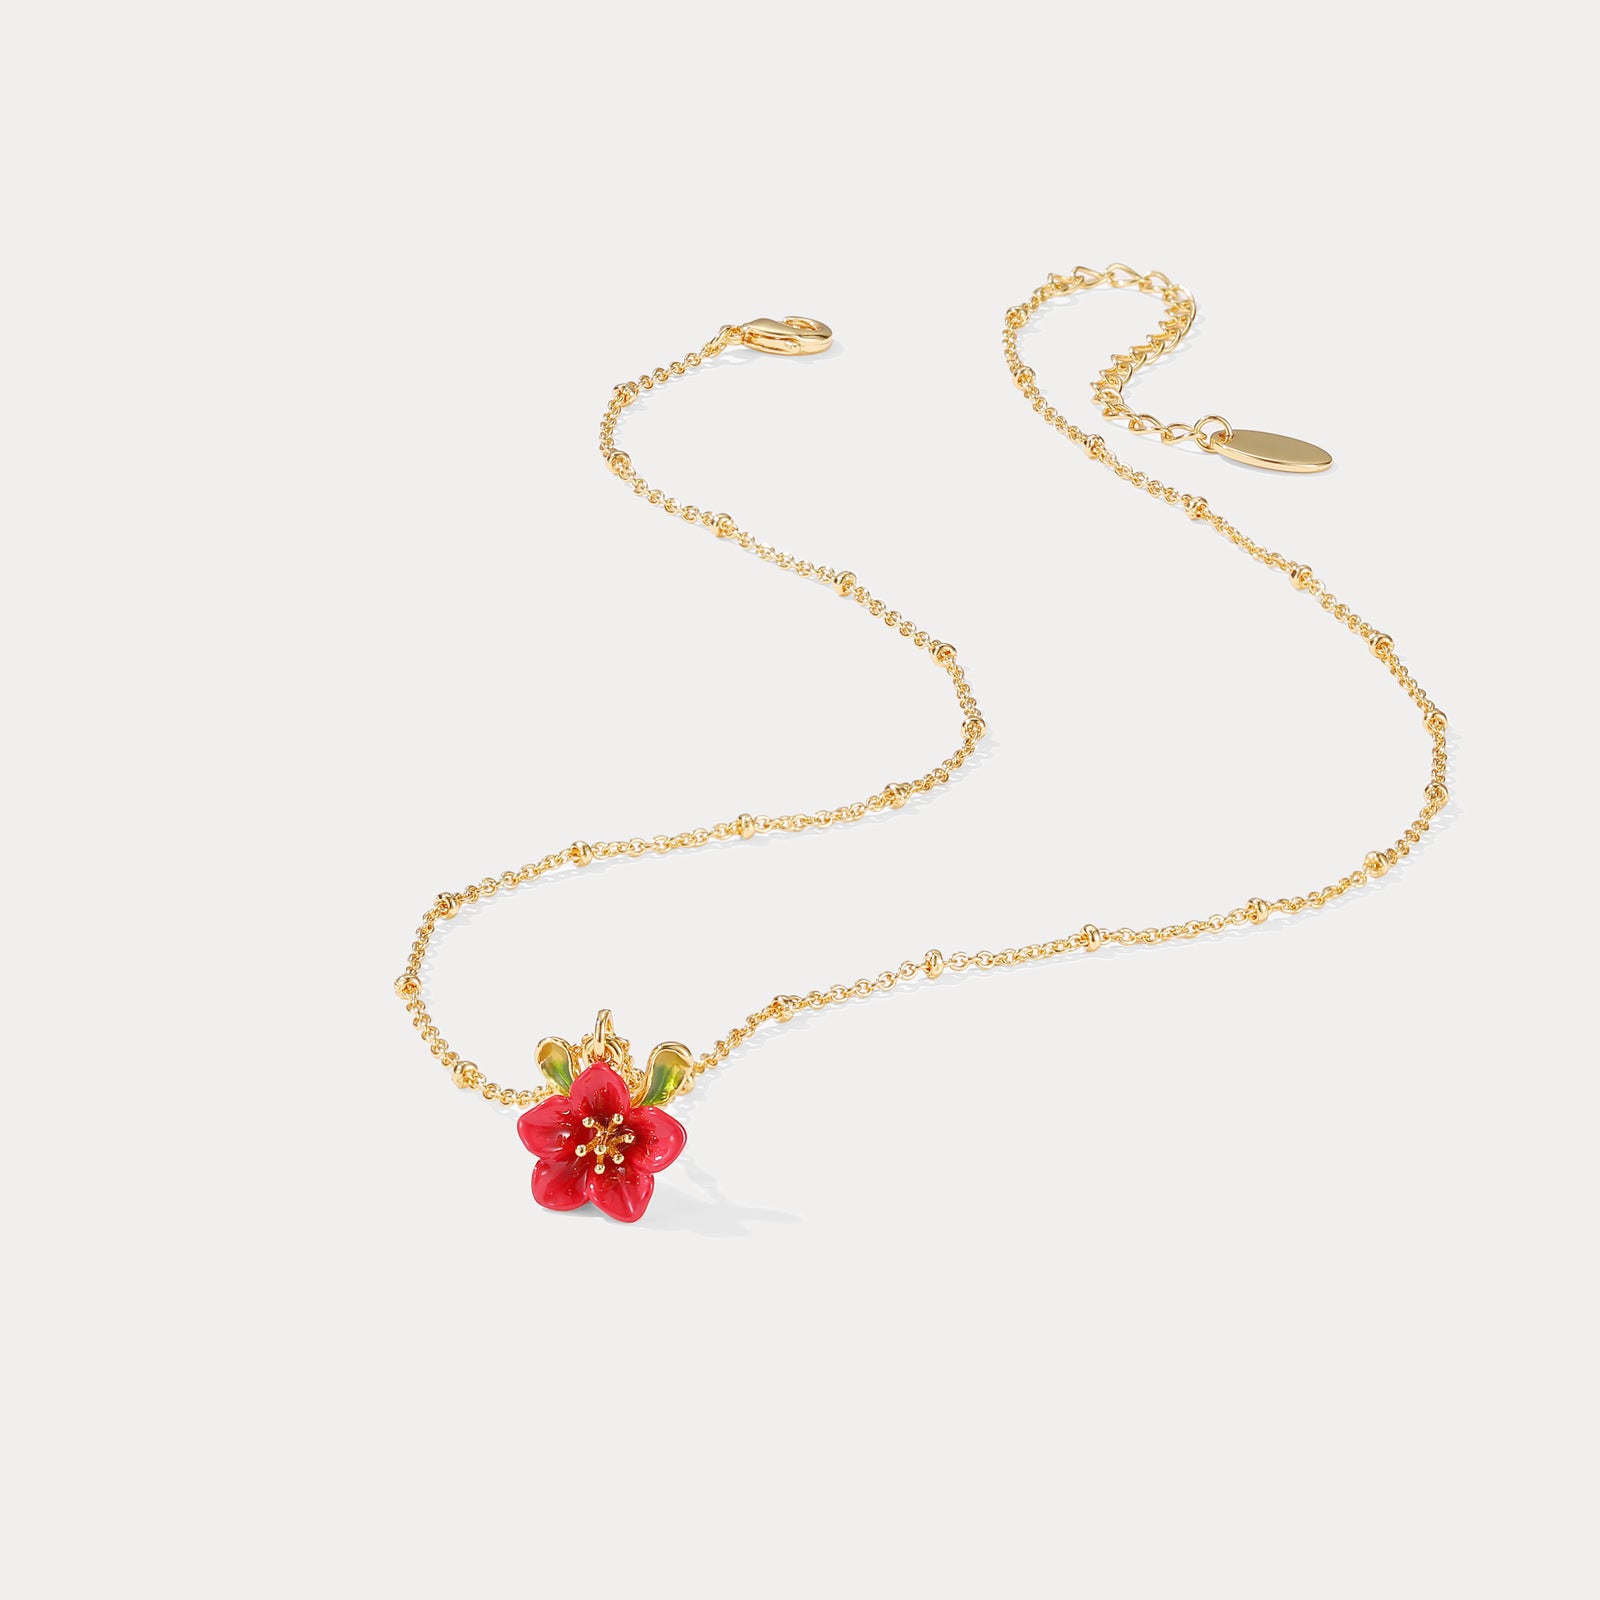 Begonia Flower Chain Necklace